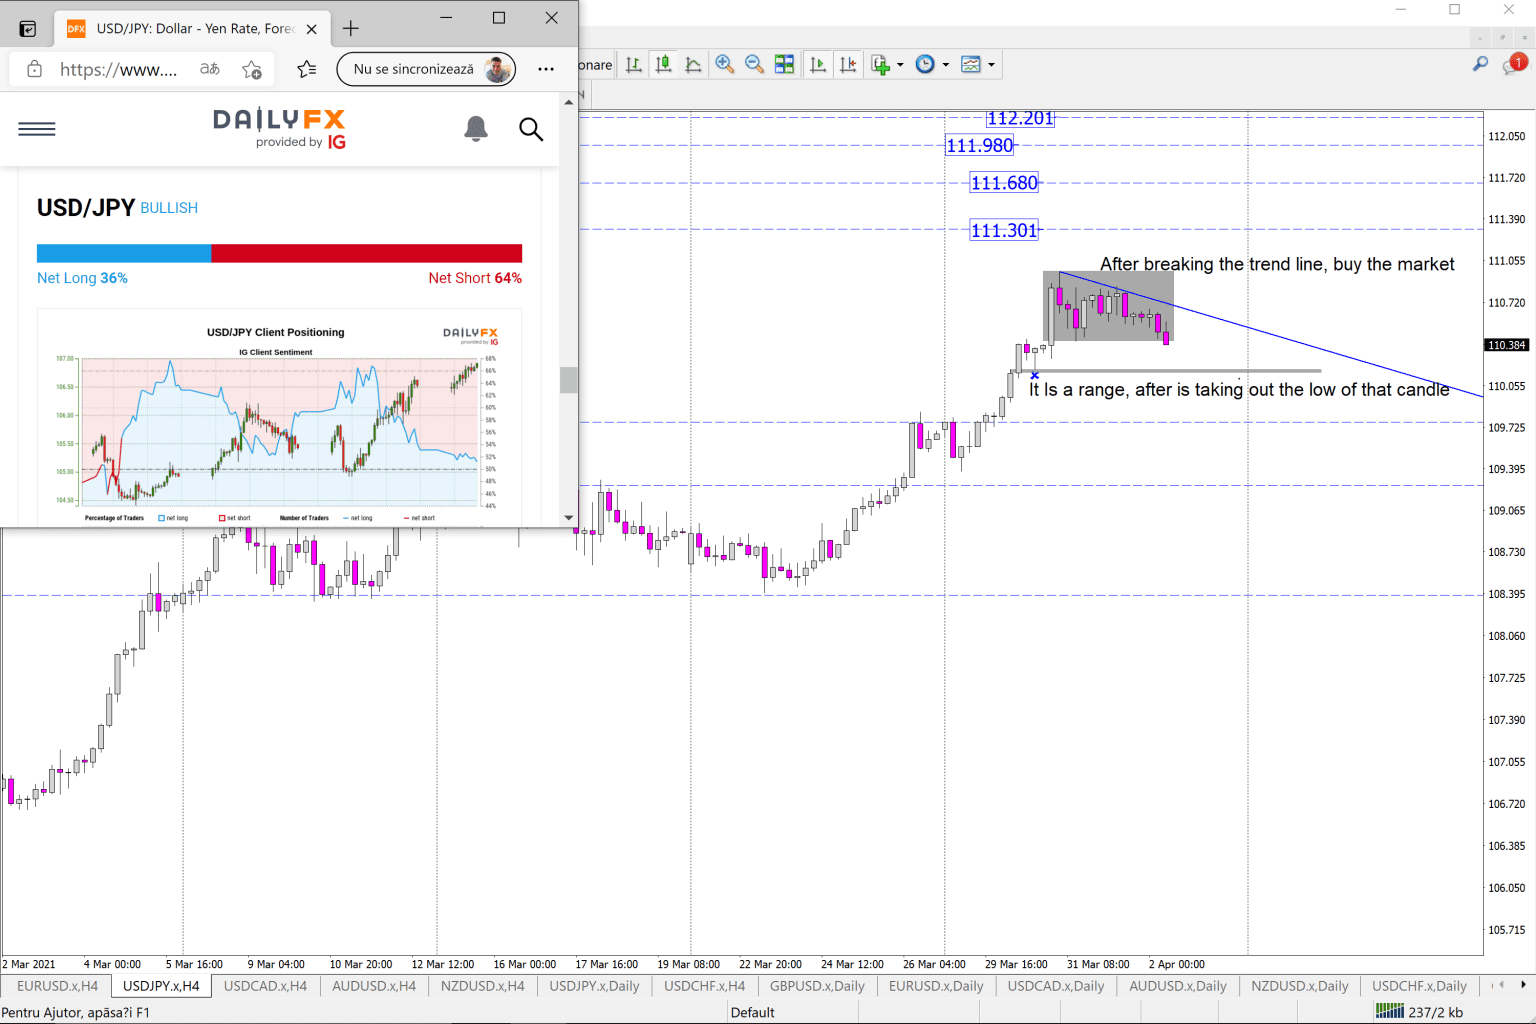 Usd Jpy Buy Usd Jpy Price Action And Liquidity Of The Market For April 2 2021